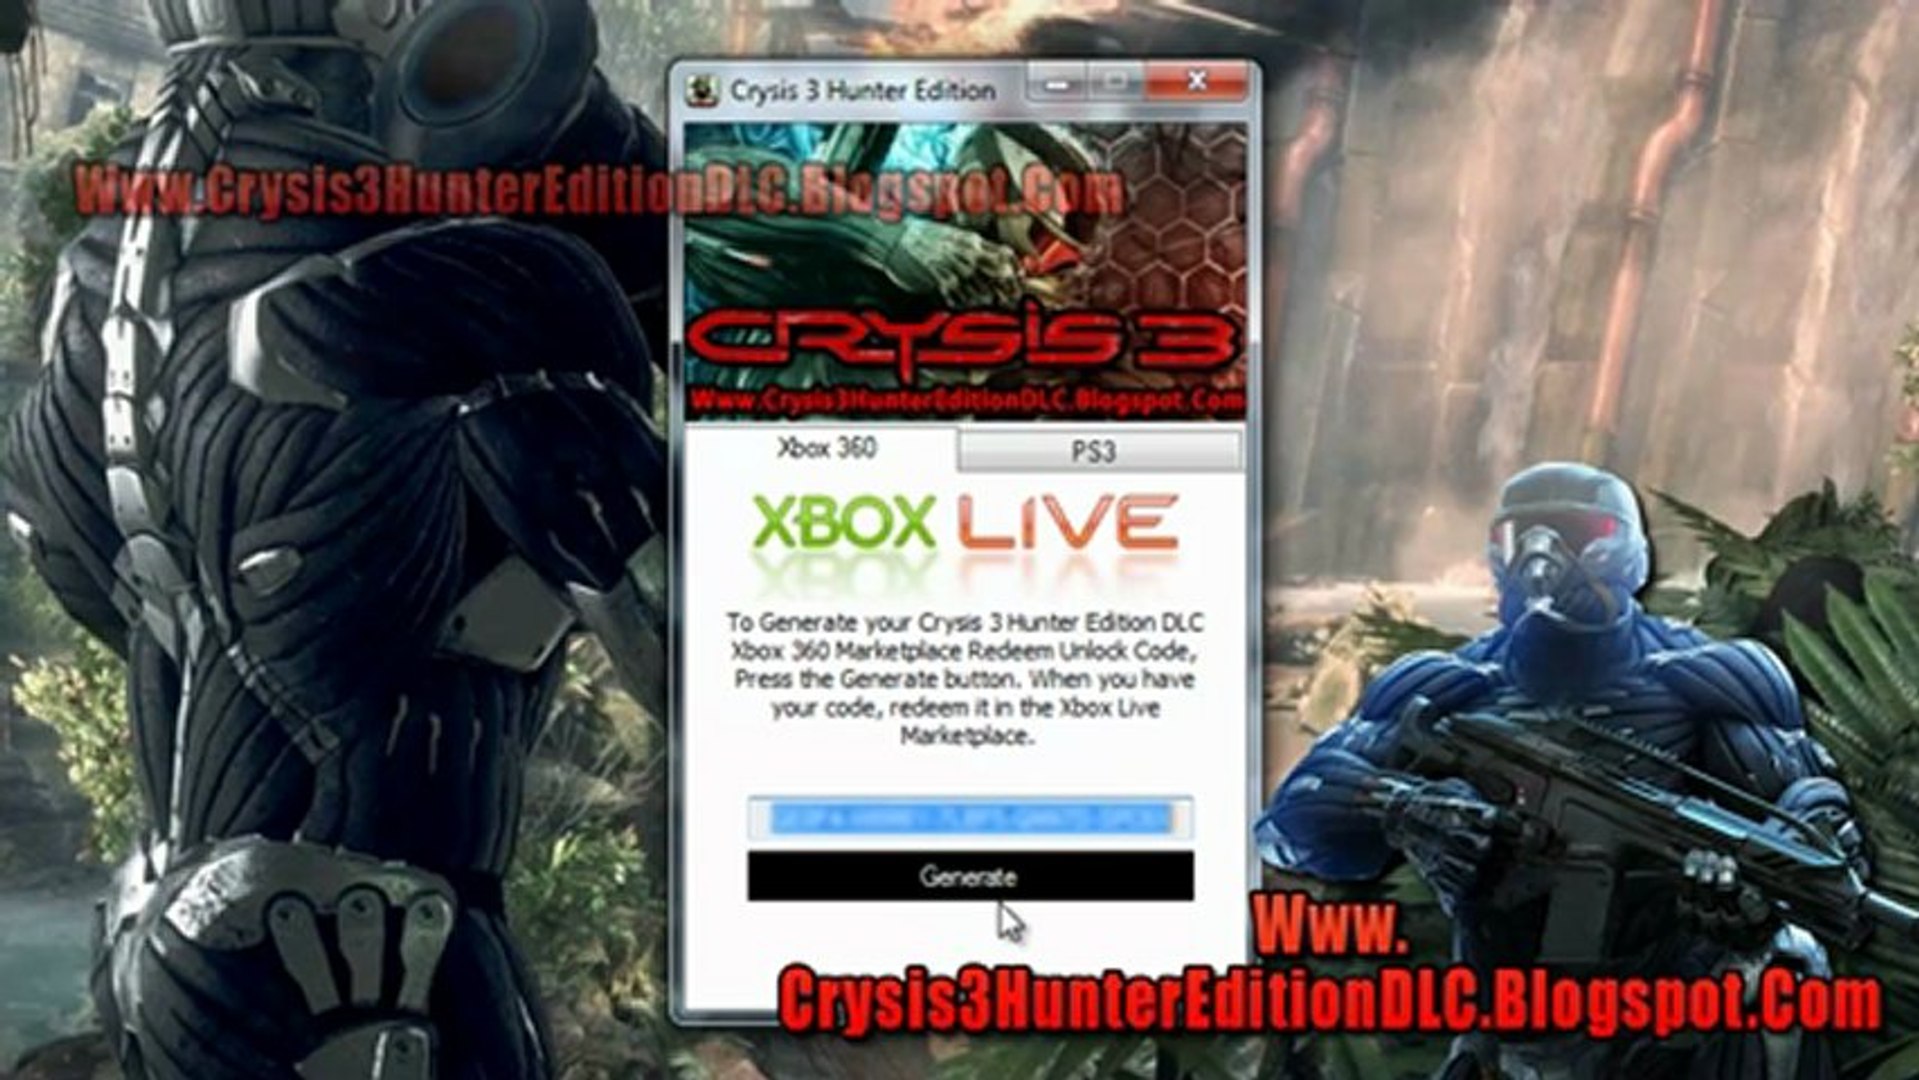 Crysis 3 Hunter Edition DLC Codes - Free!! - video Dailymotion